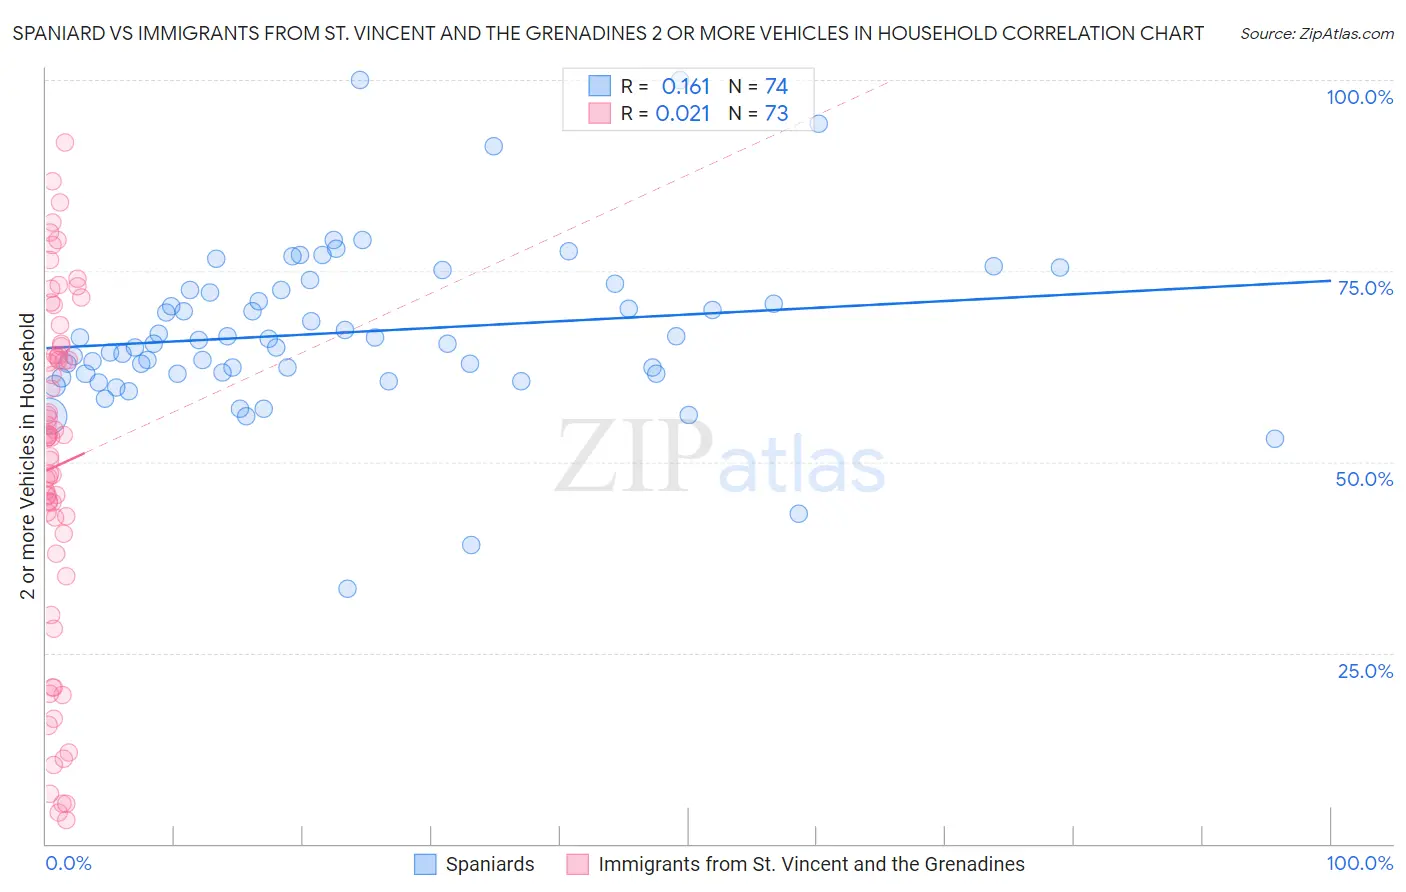 Spaniard vs Immigrants from St. Vincent and the Grenadines 2 or more Vehicles in Household